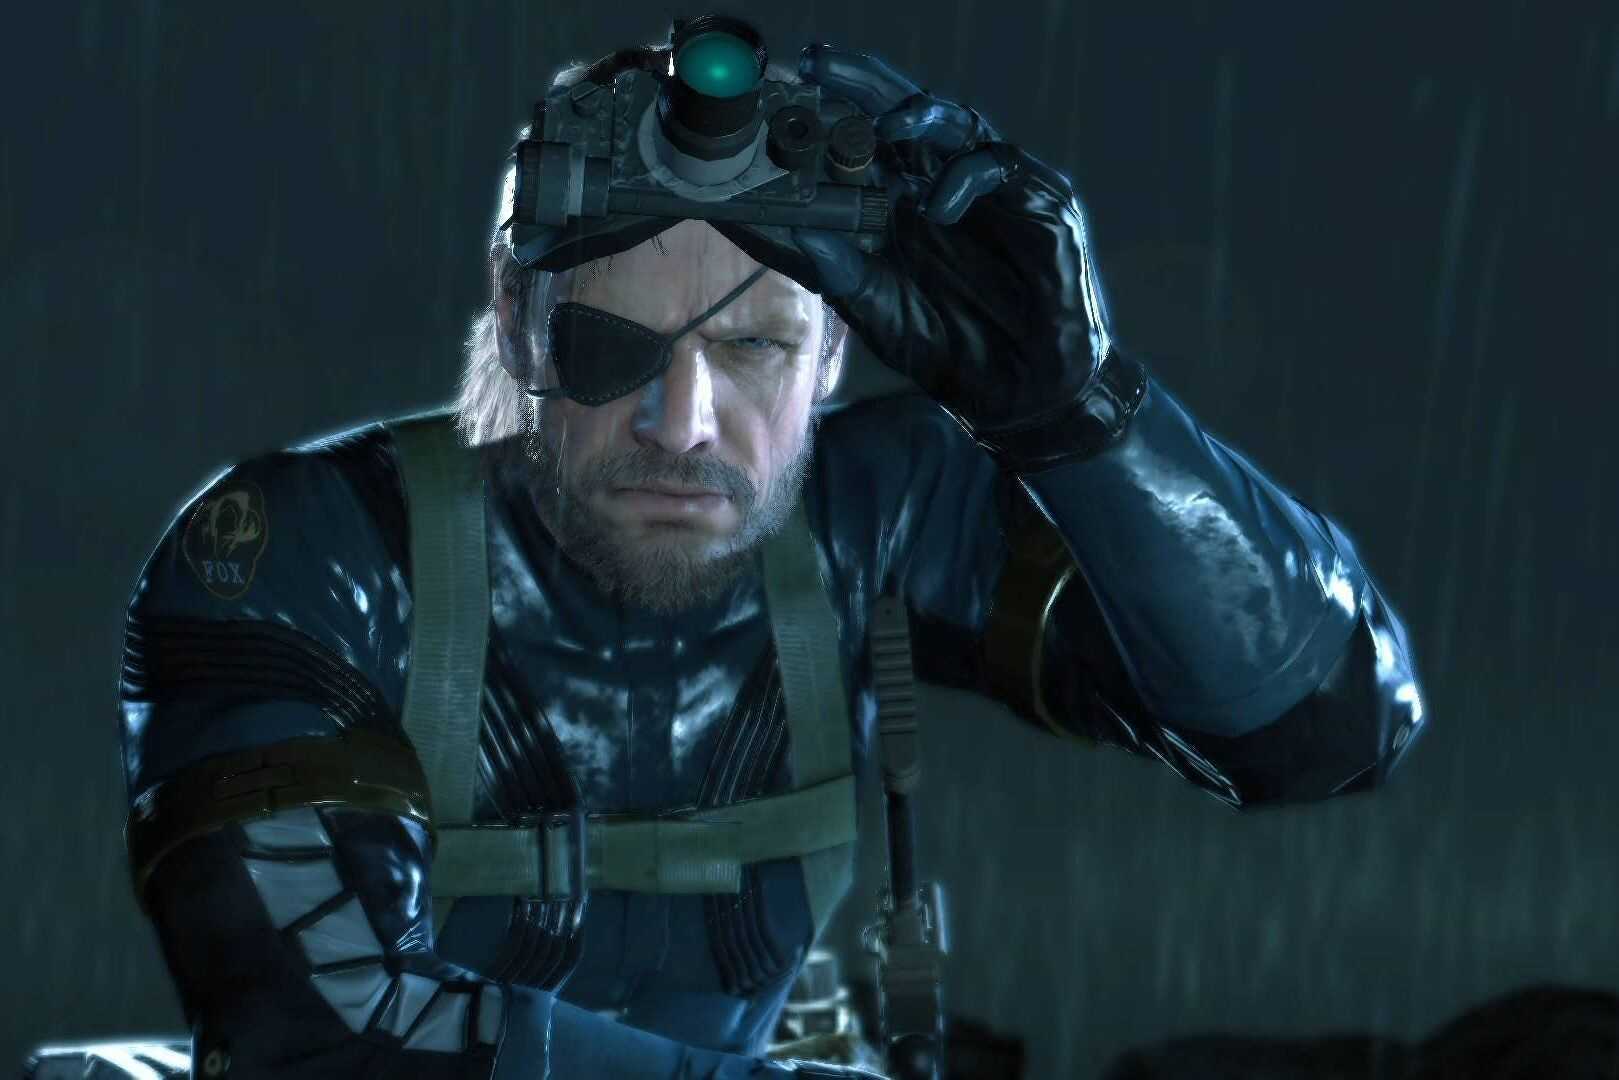 Metal gear solid v: ground zeroes